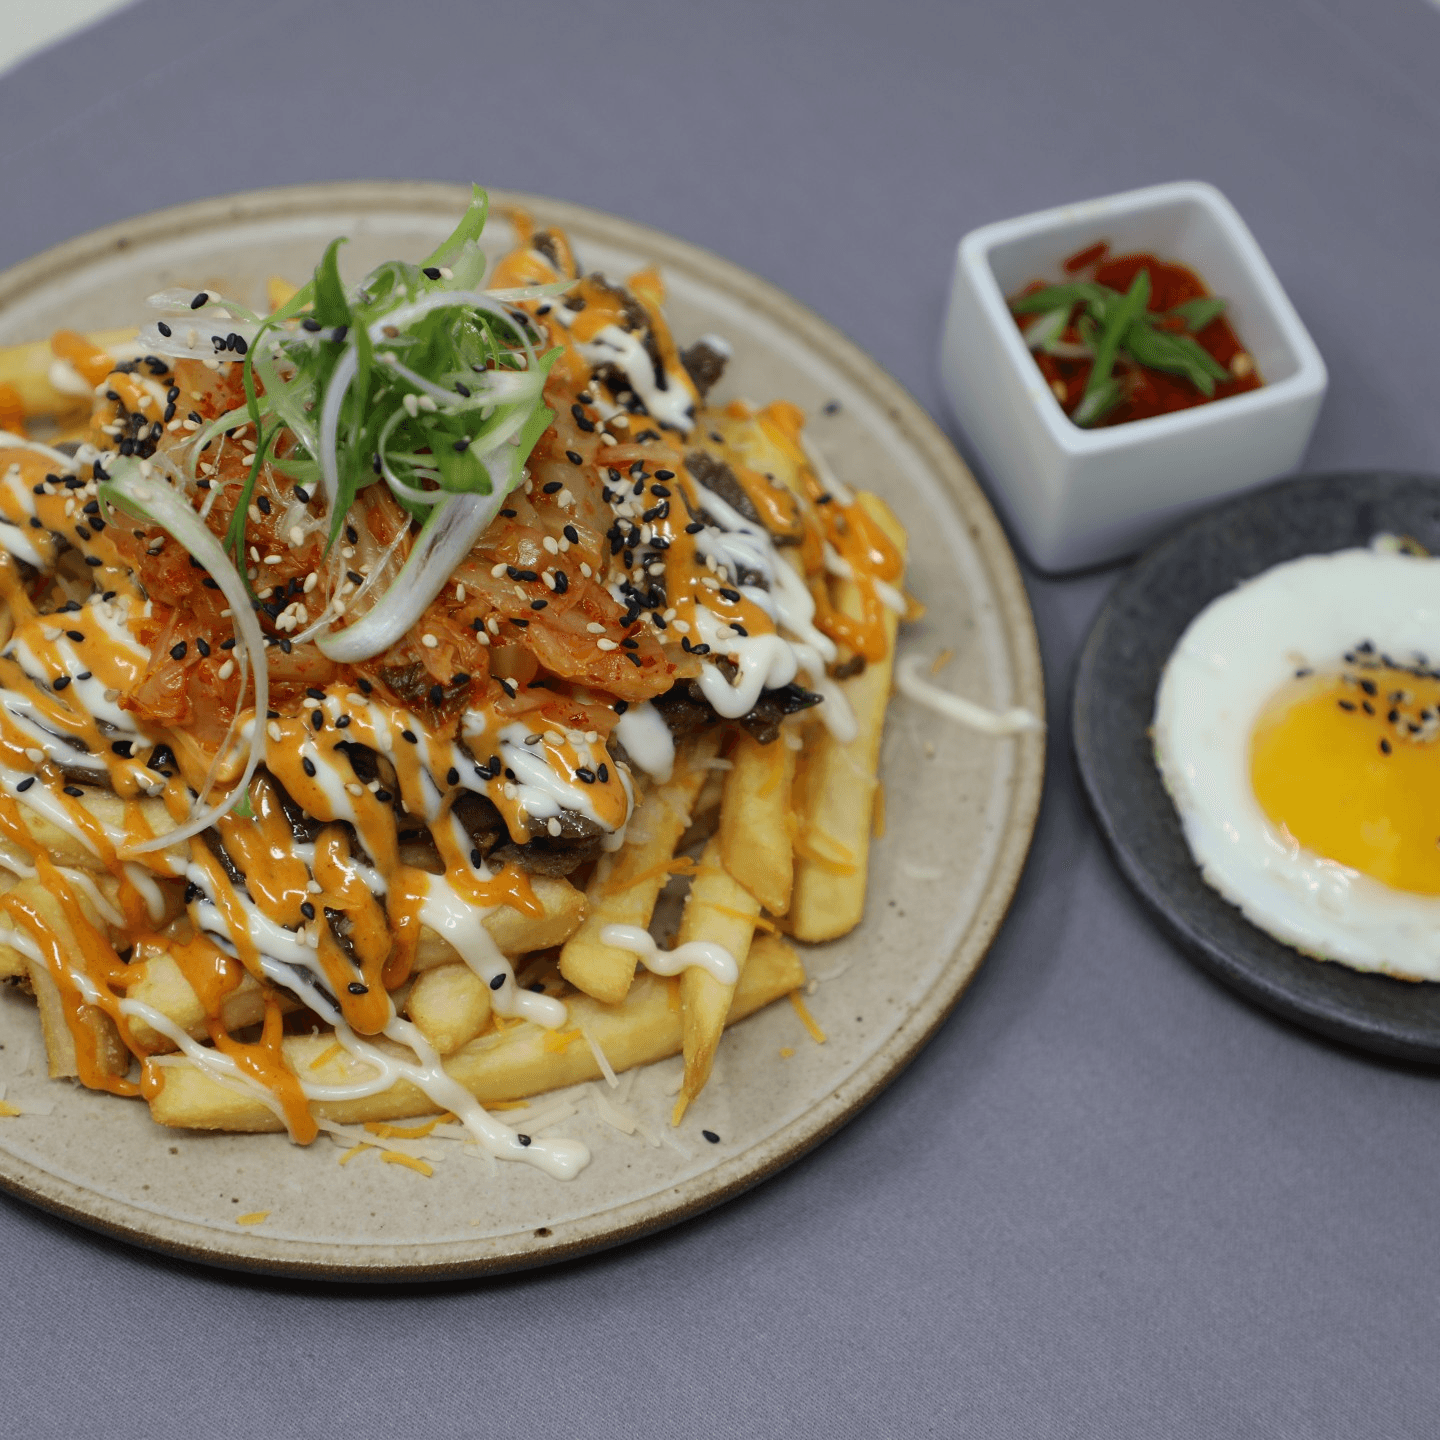 Ignite Your Palate with Fire Fries